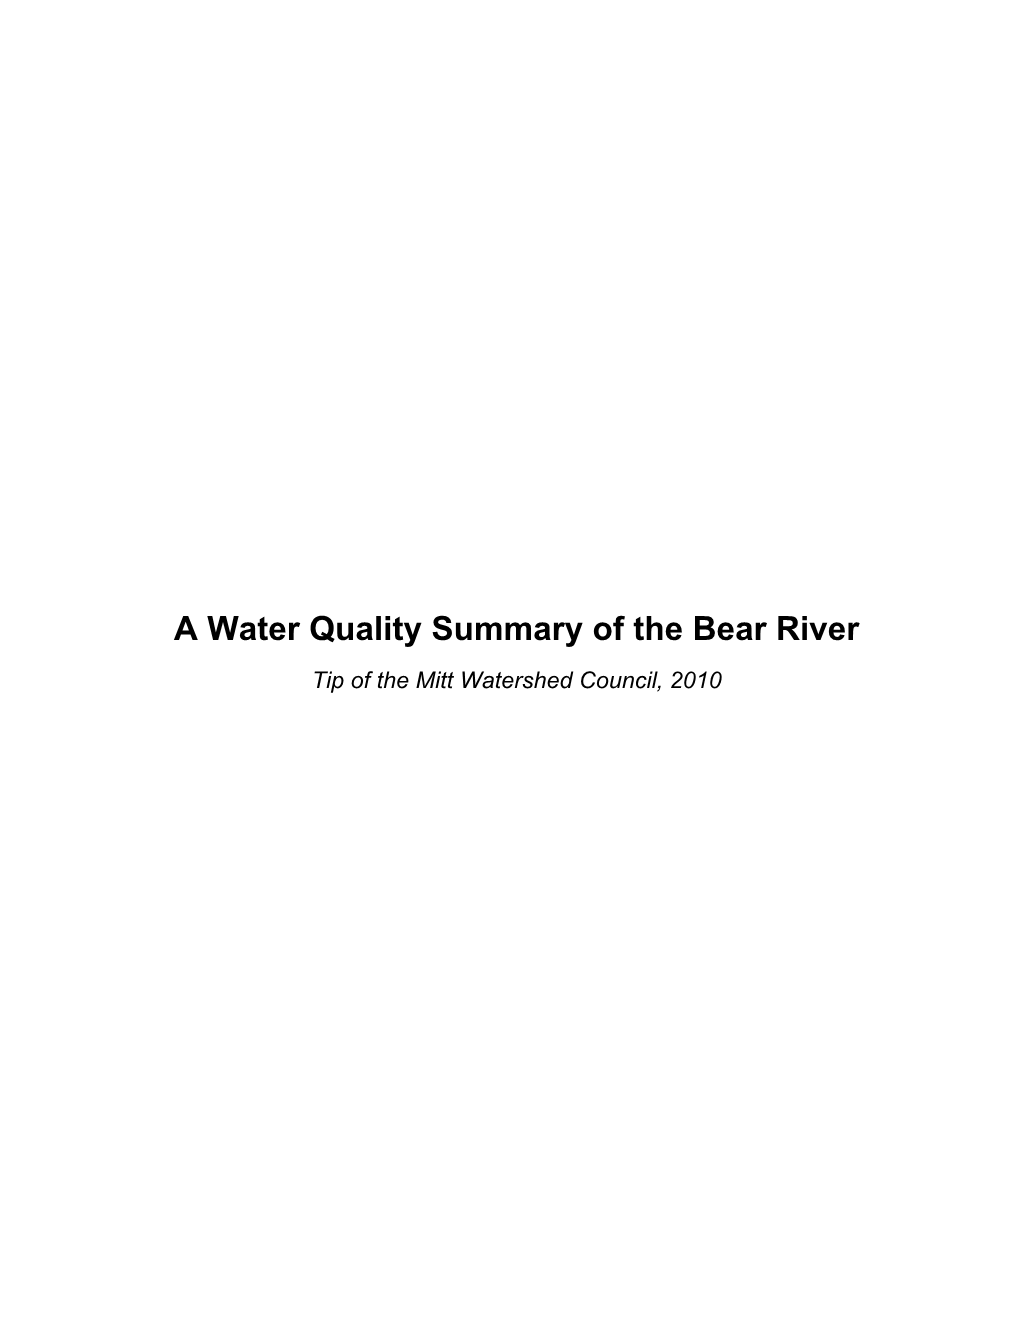 A Water Quality Summary of the Bear River Tip of the Mitt Watershed Council, 2010